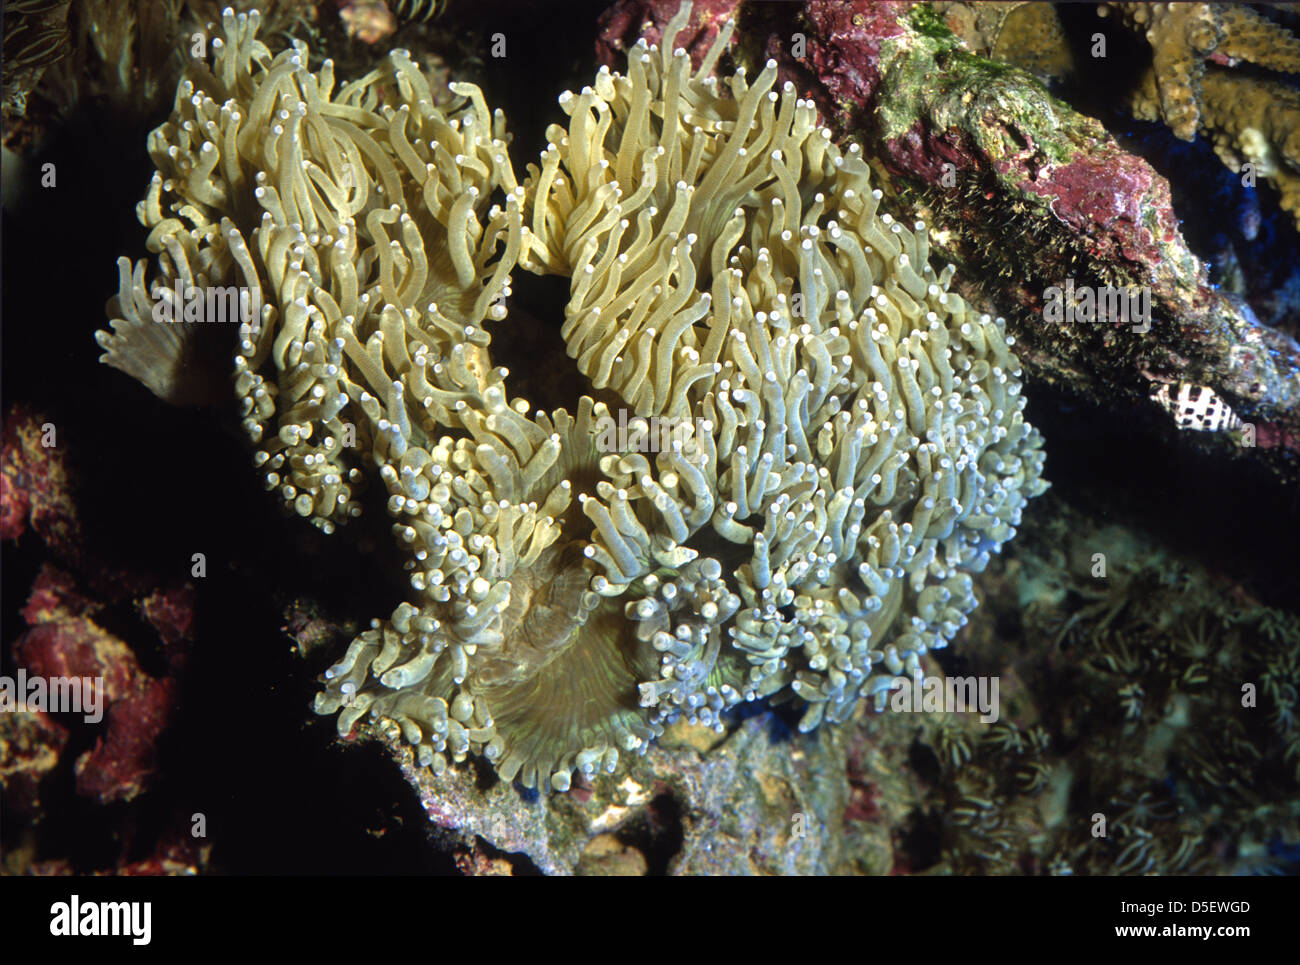 Aussie Torch Coral, Euphyllia glabrescens, Euphylliidae Indo-pacific Ocean Stock Photo